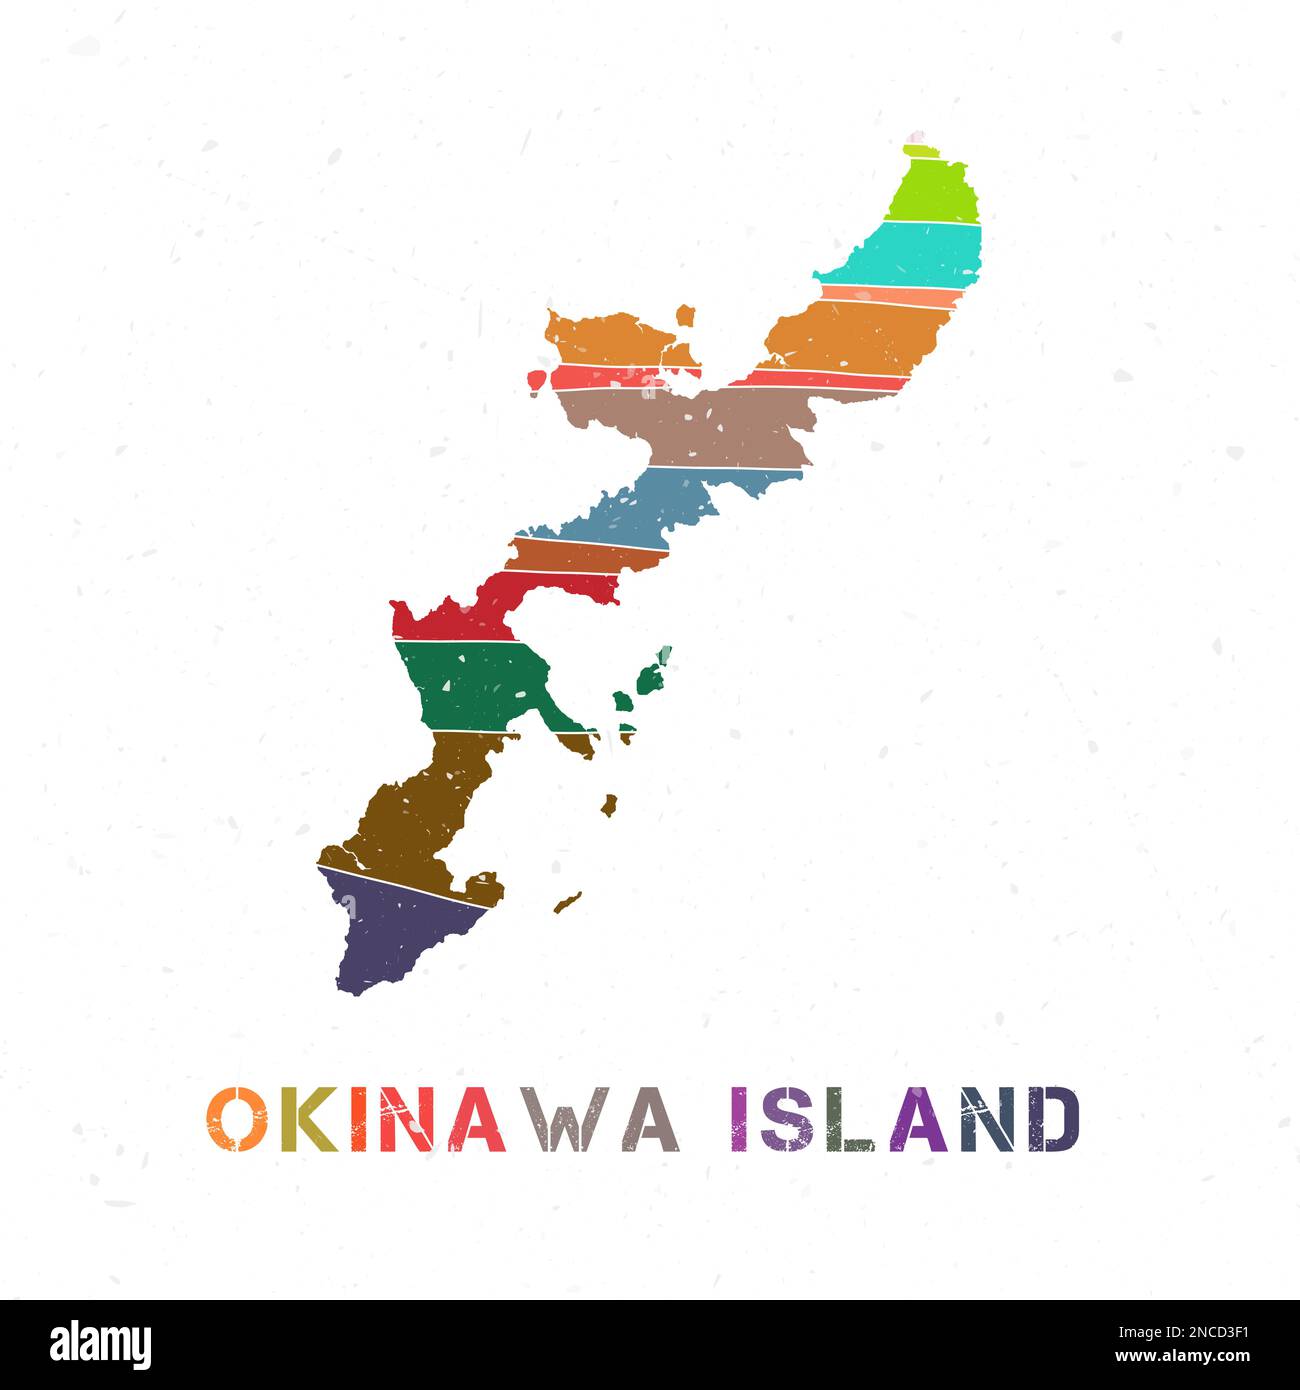 Okinawa Island map design. Shape of the island with beautiful geometric waves and grunge texture. Beautiful vector illustration. Stock Vector